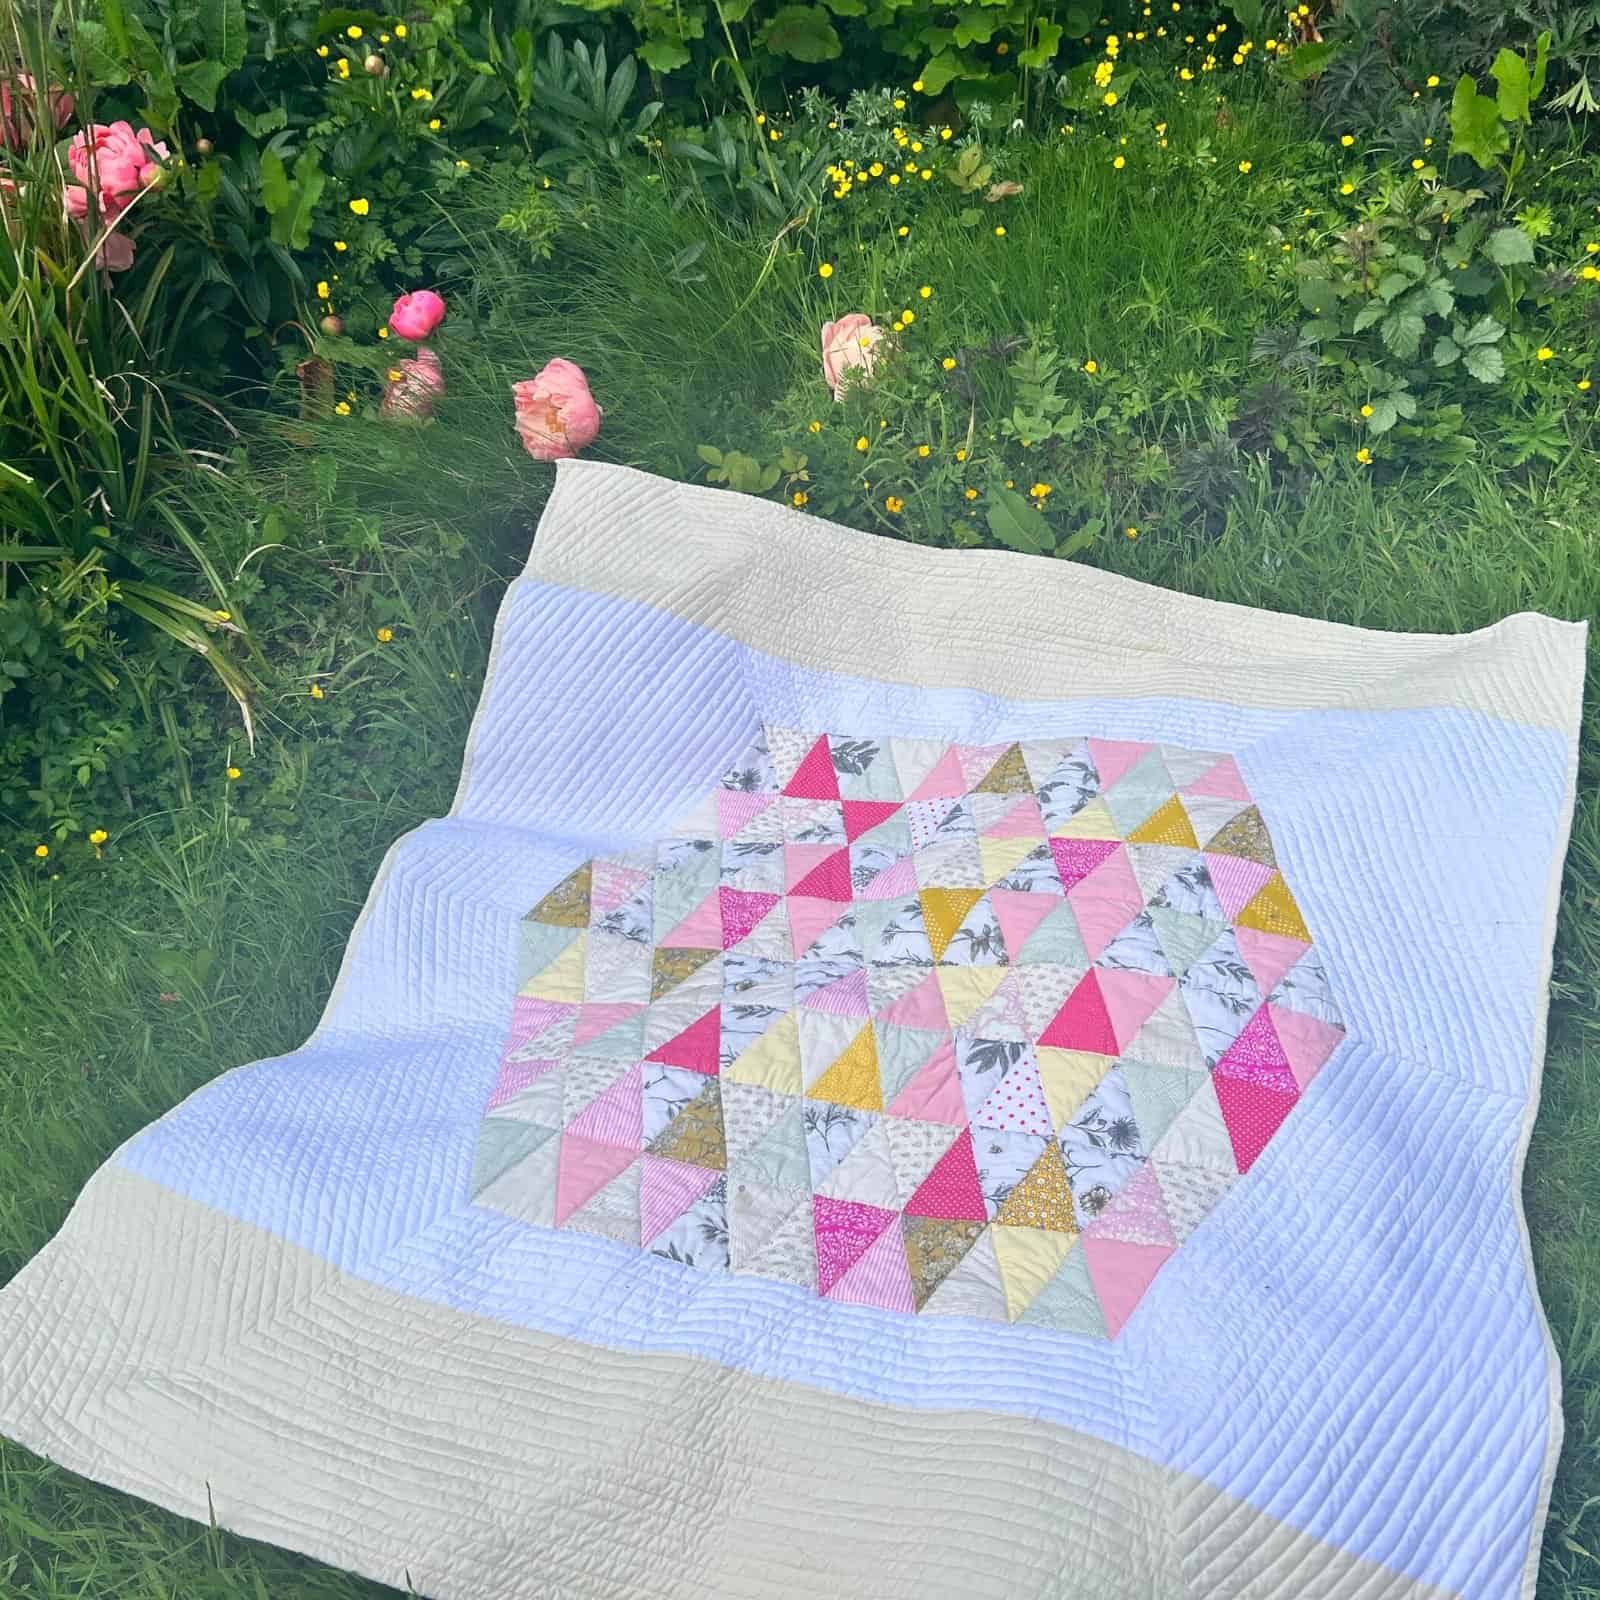 How Do I Choose The Fabric For My Triangle Quilt?